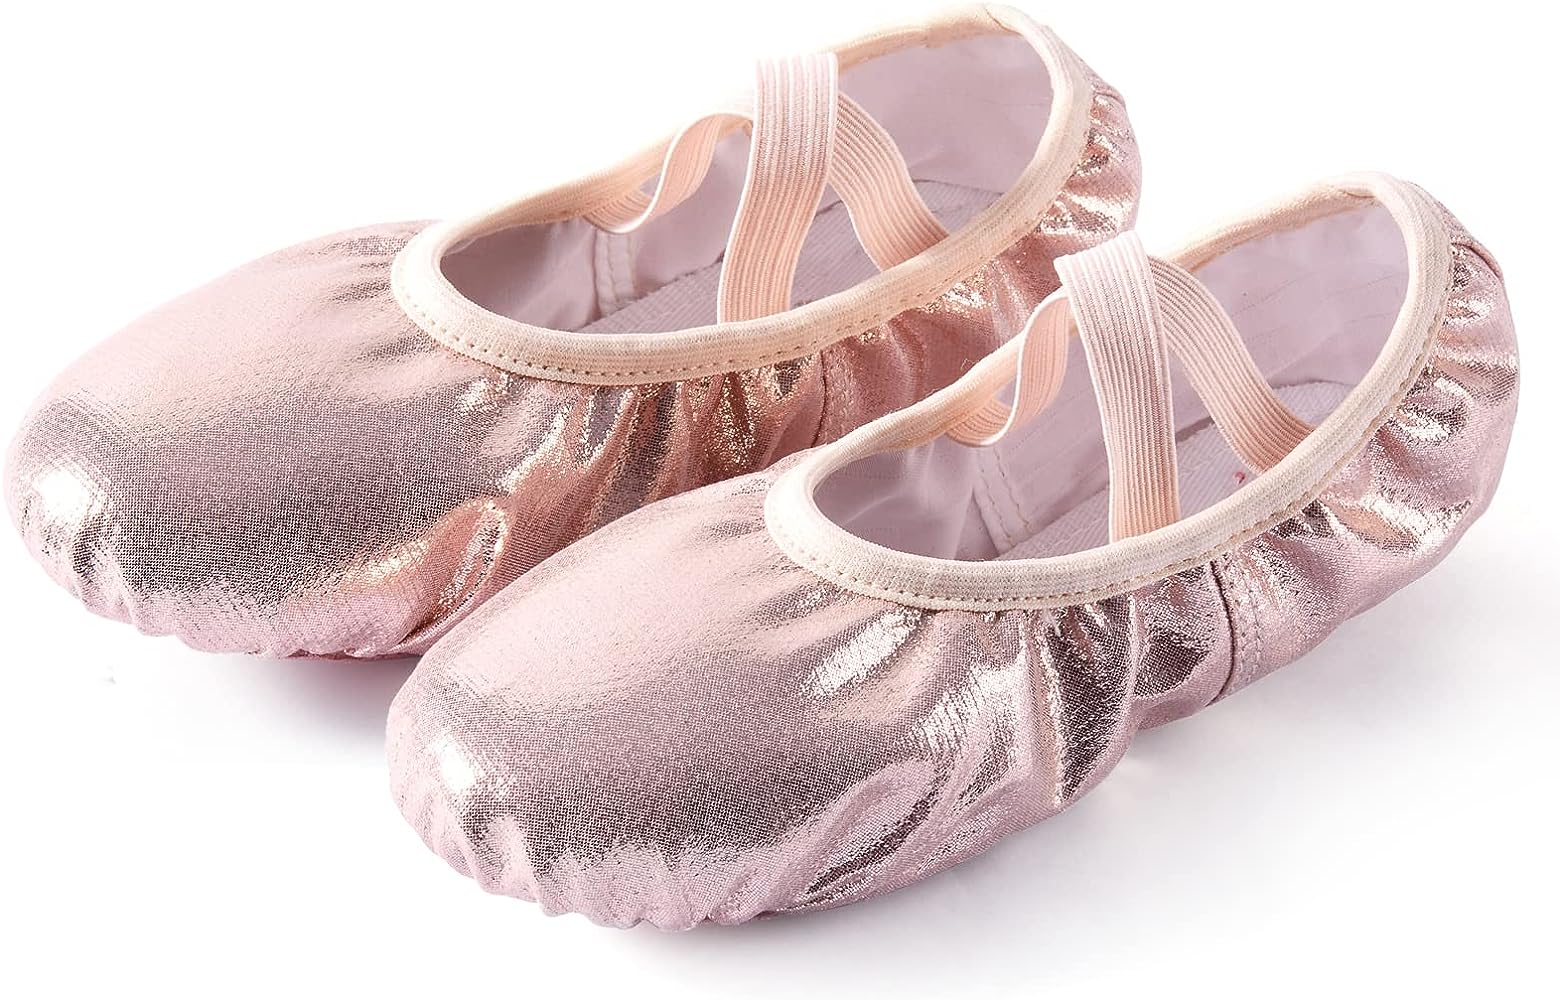 Where Can You Buy Ballet Slippers